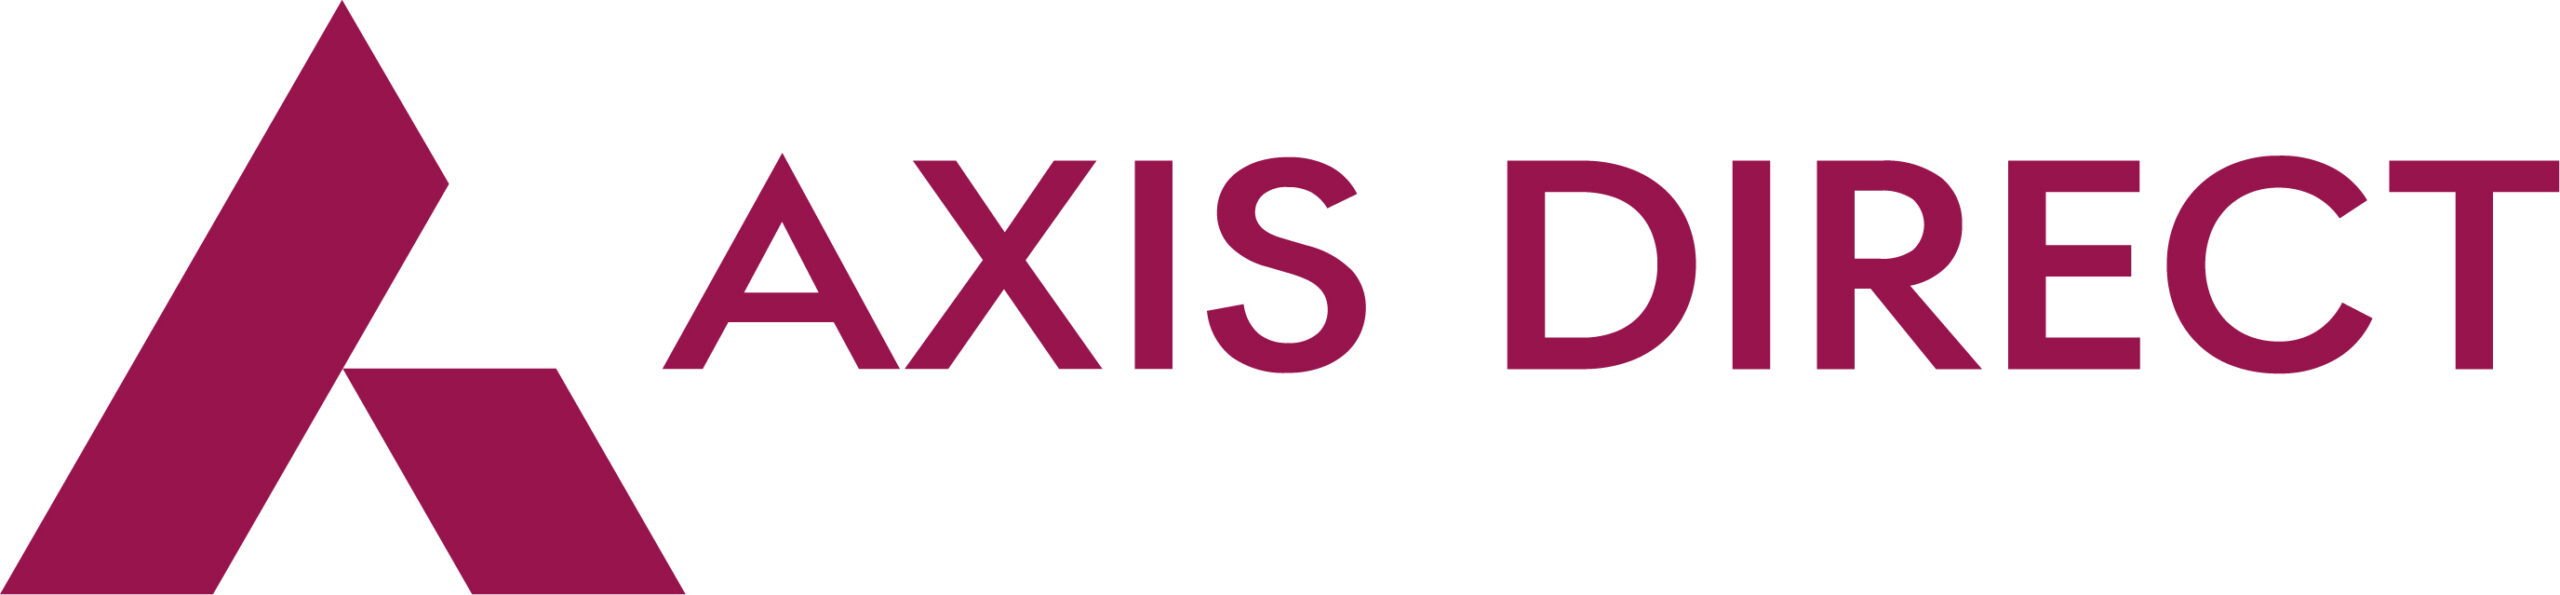 Axis Direct Launches a revolutionary mobile application